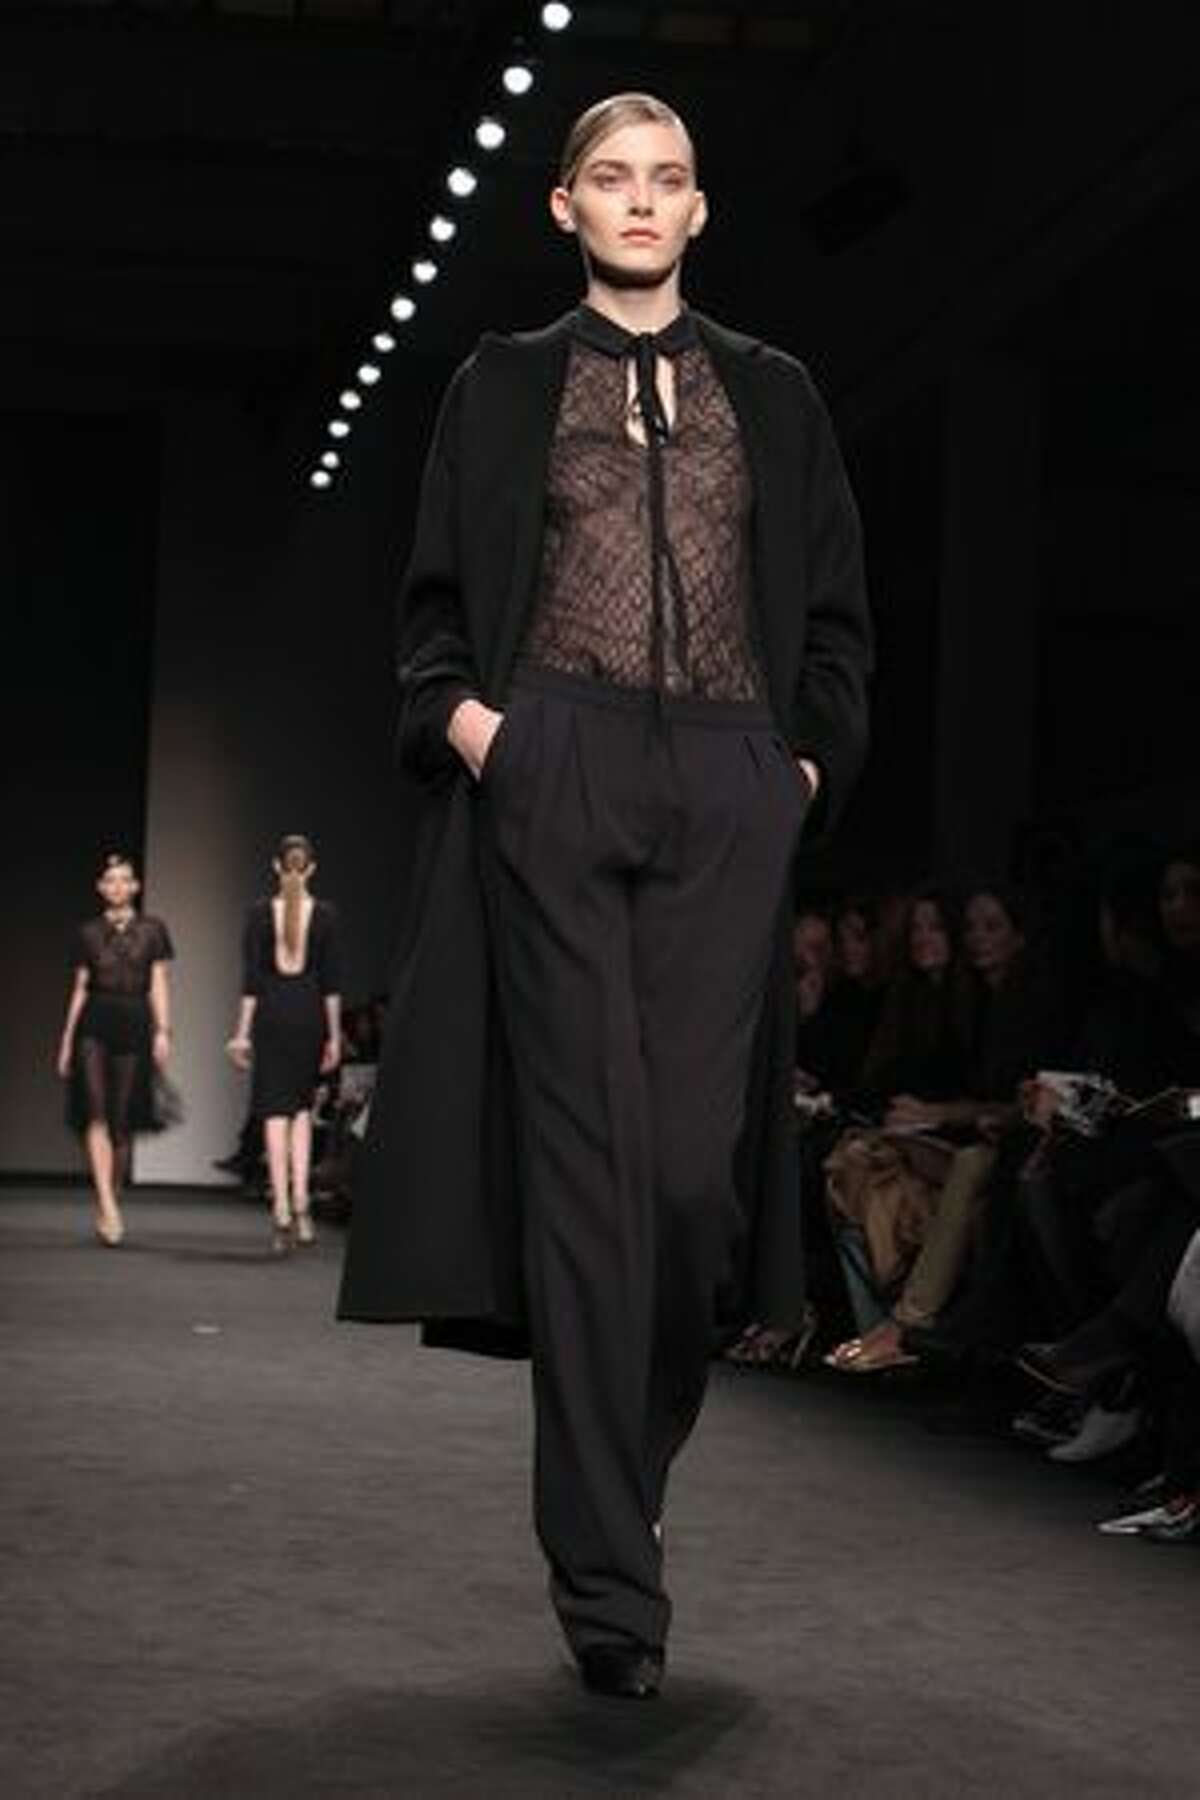 A model walks the runway during the Brioni fashion show.